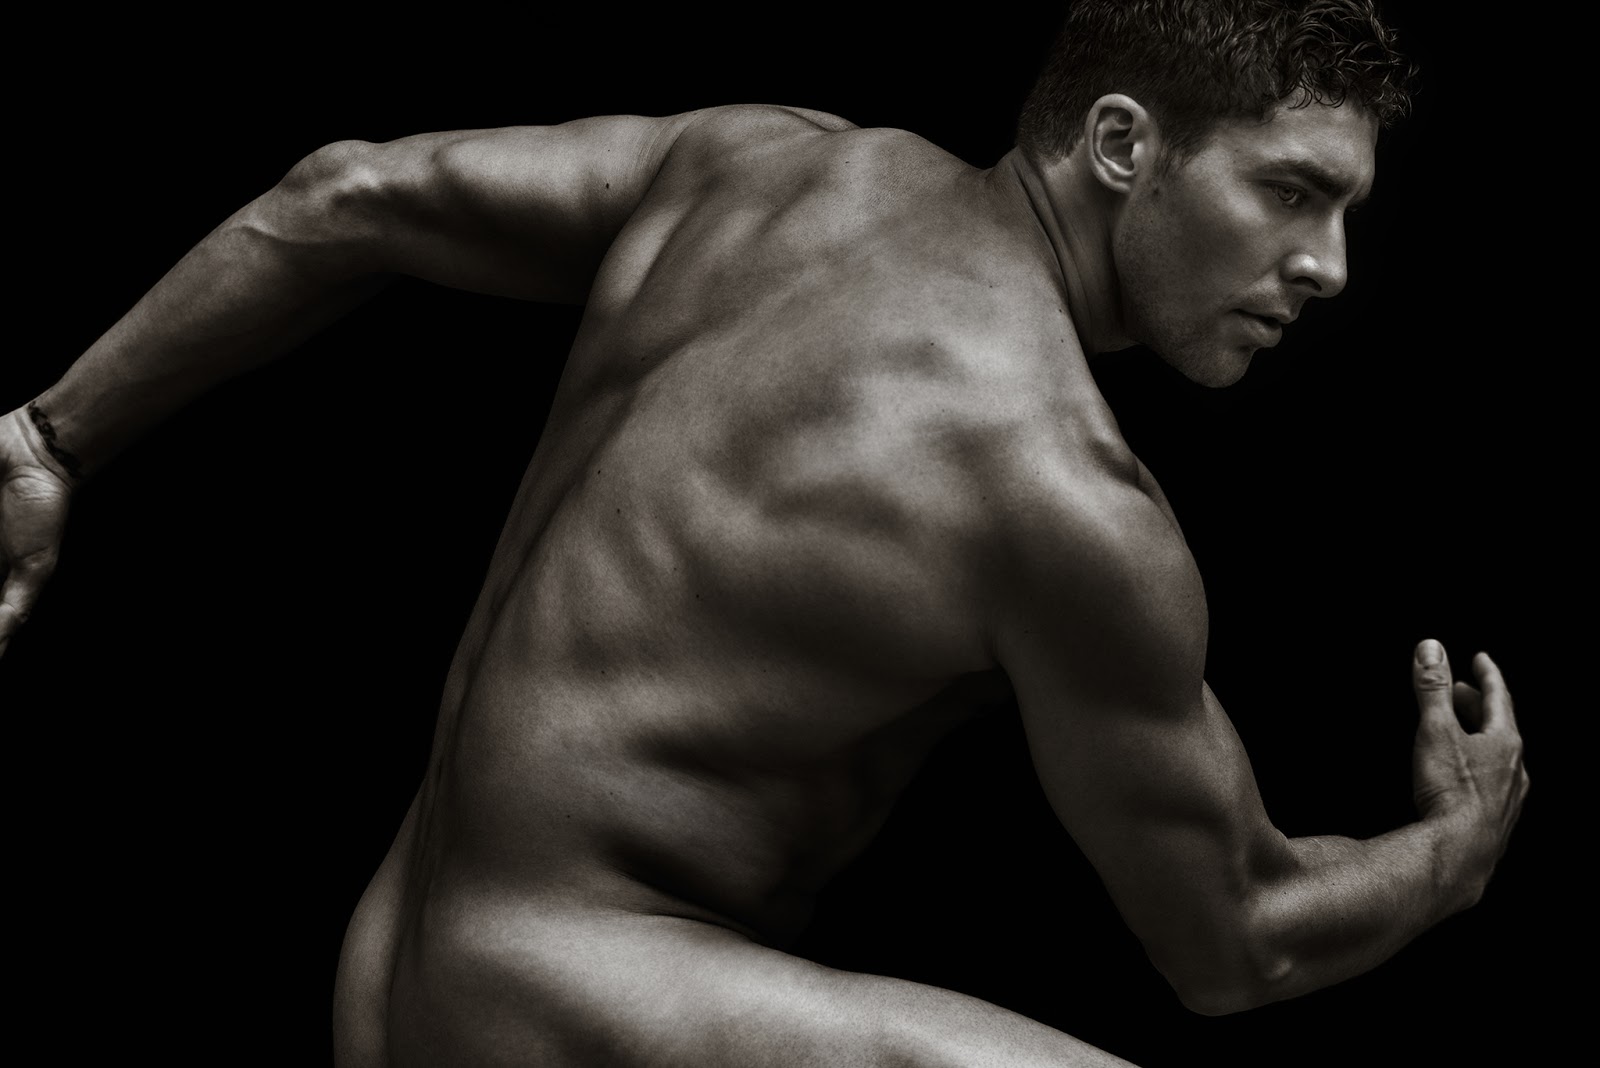 Joffrey Lupul is NHL's nude rep in ESPN The Magazine's Body Issue (Photos)